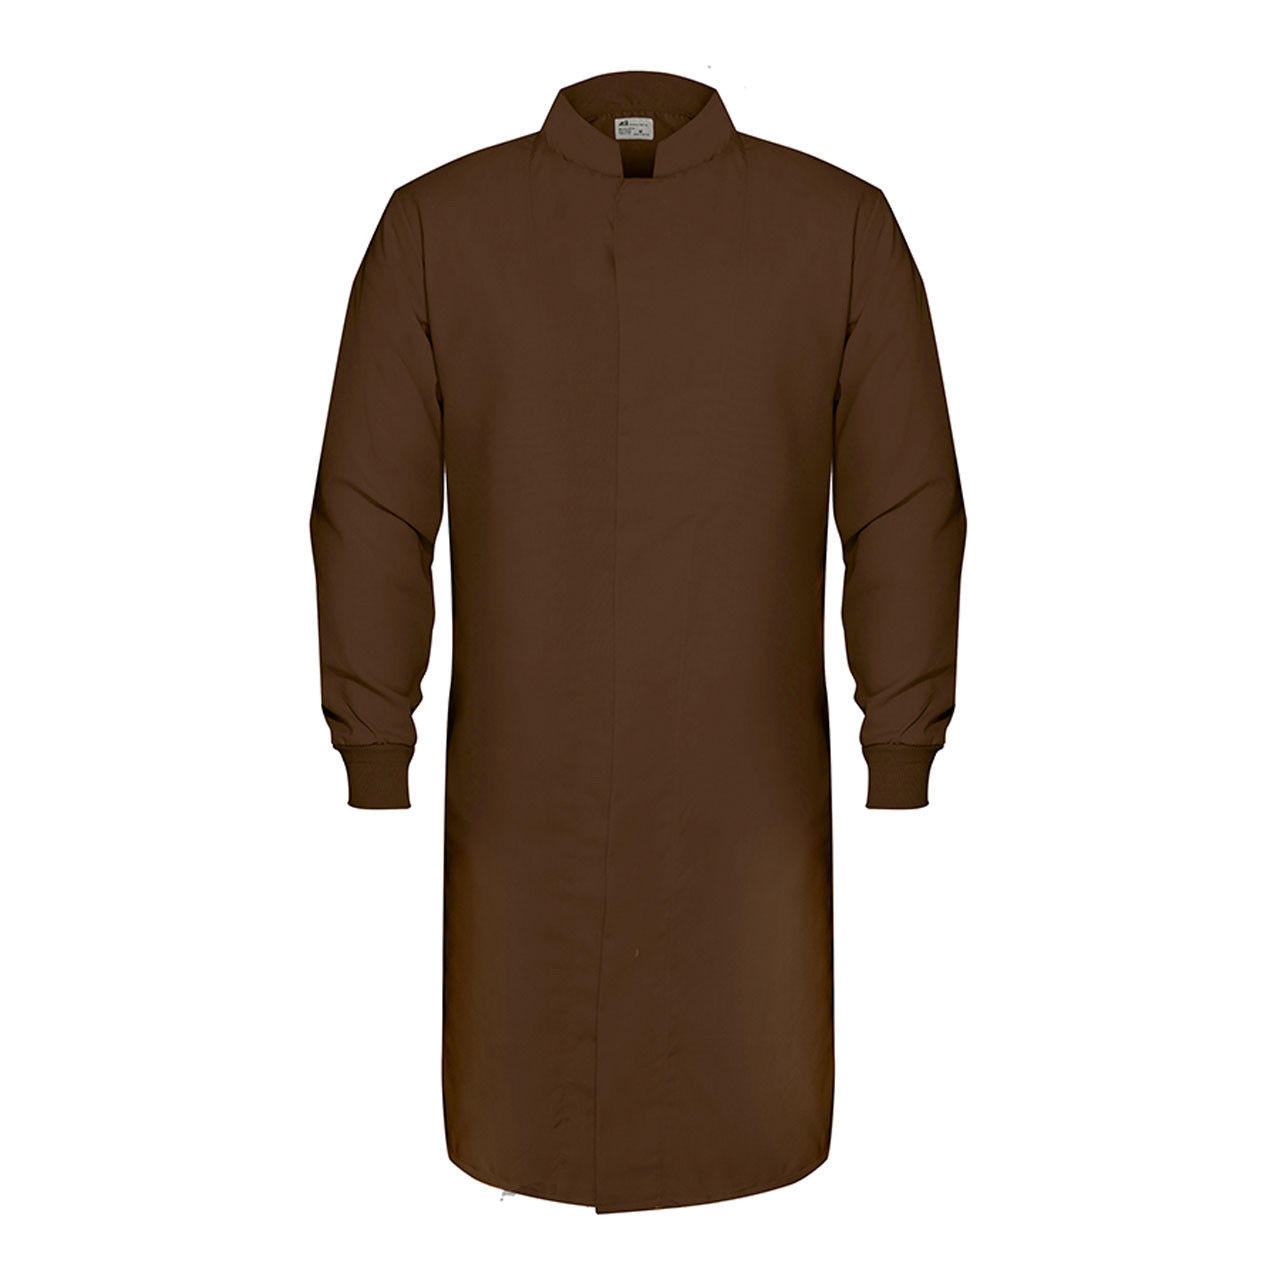 Is the brown lab coat HACCP approved for high-level protection?